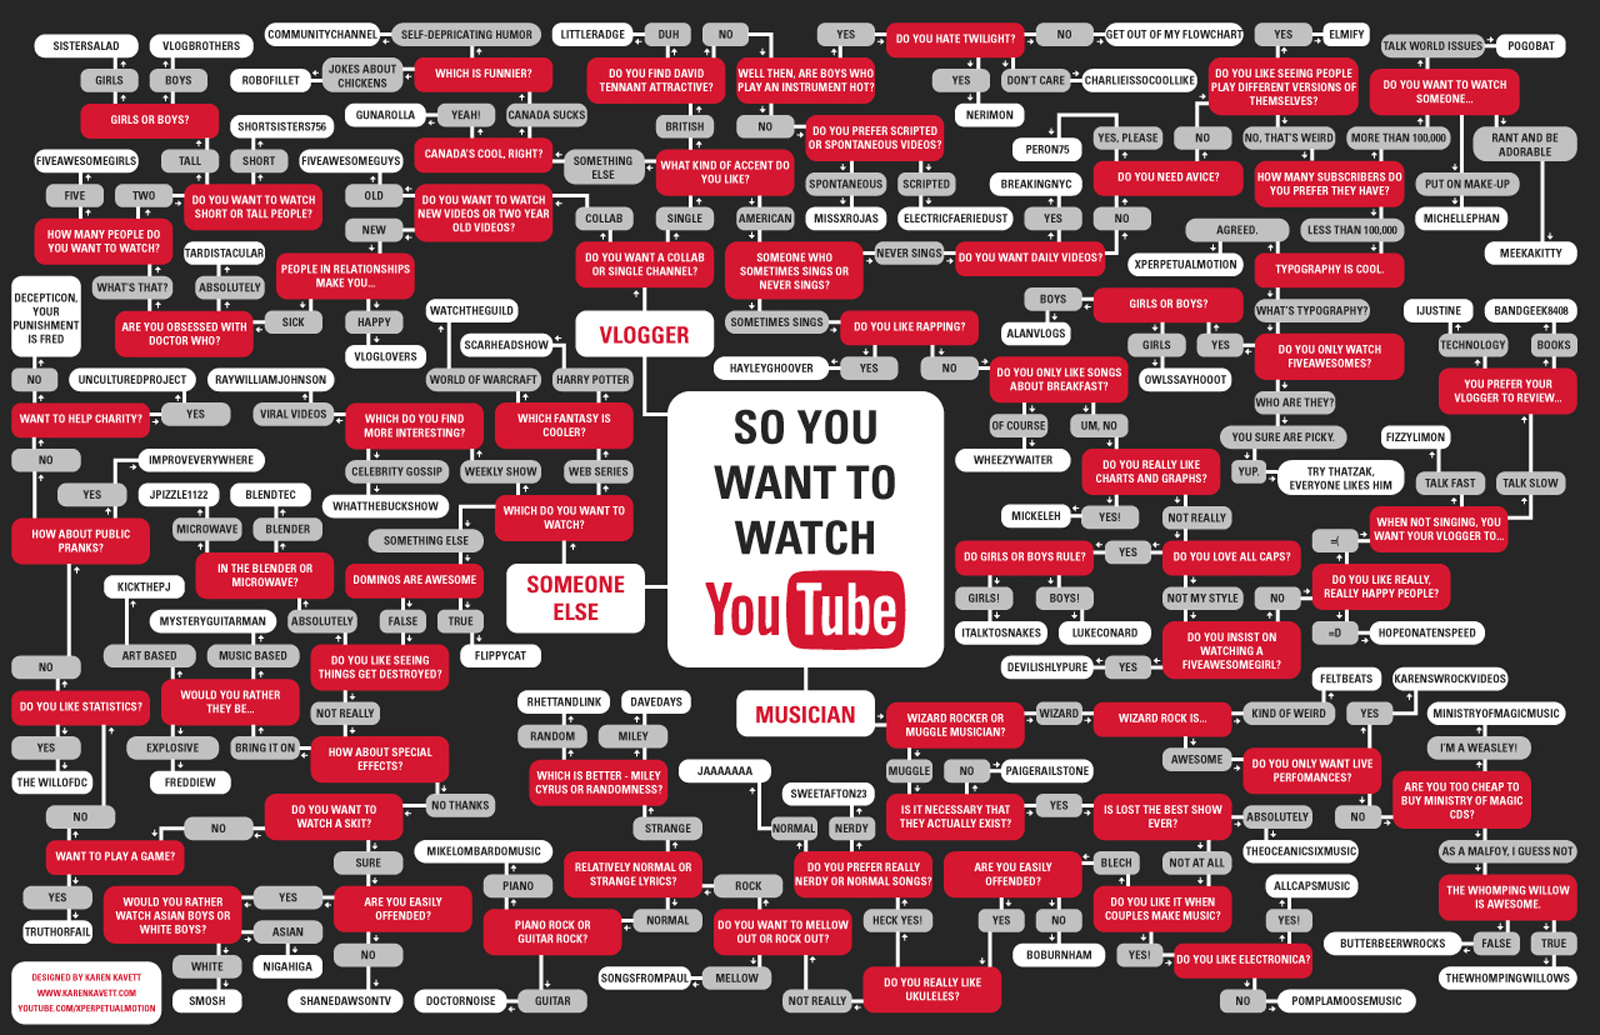 February 14, 2005: YouTube Launched – Inspired by Janet Jackson's Breast | This Day in Tech History